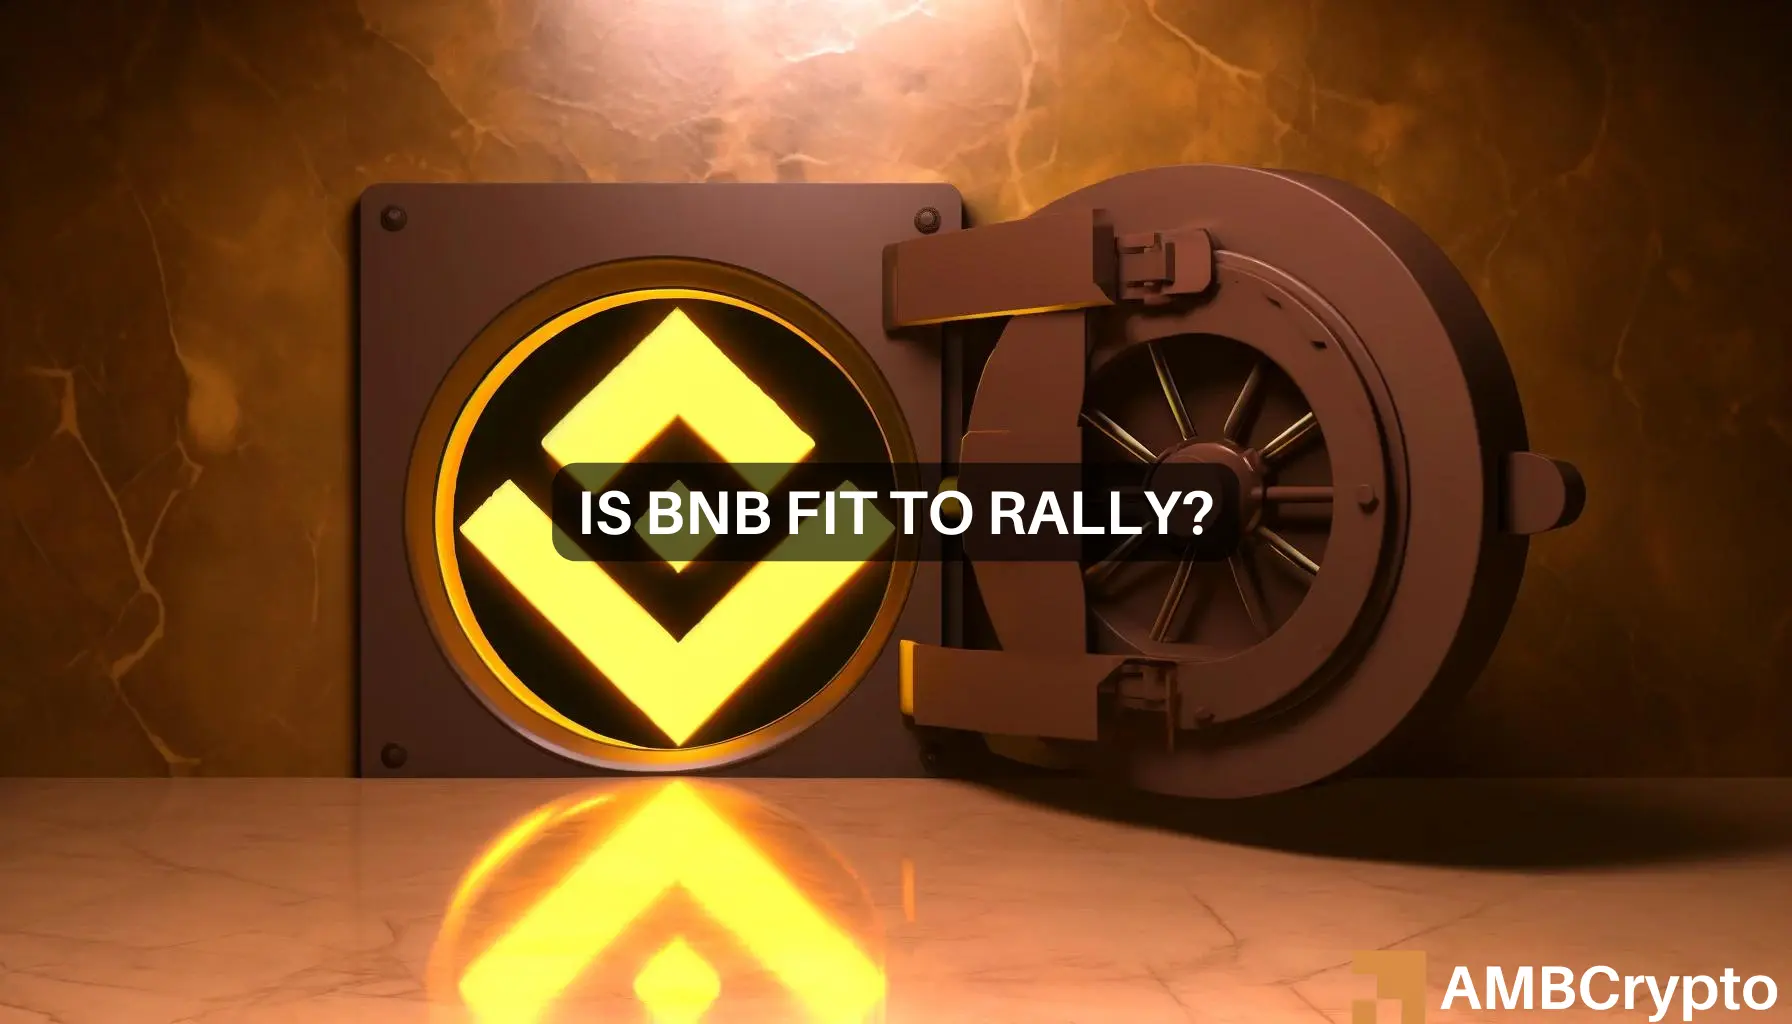 BNB Chain DEX volume surges - Examining what it means for BNB's price